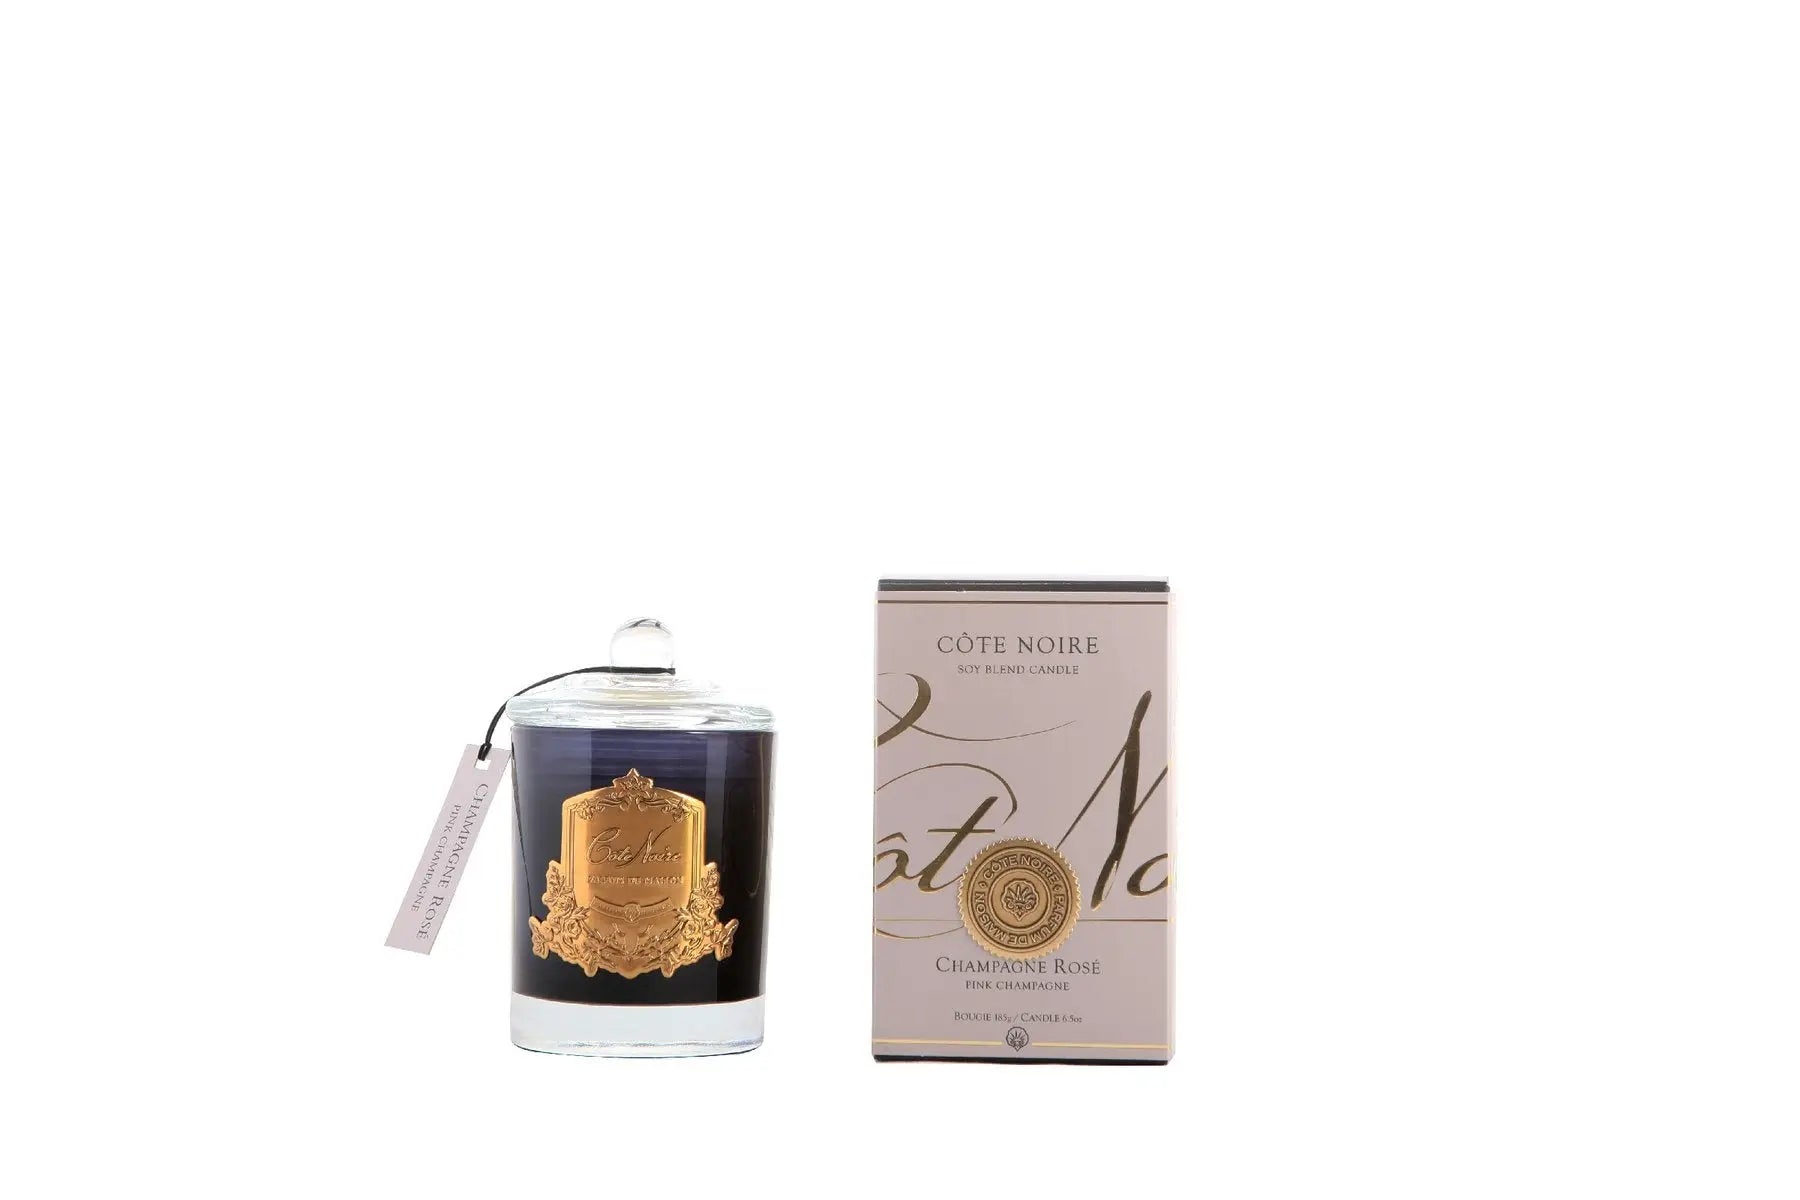 Gold 185 G Candle Champagne Rose - Pink Champagne - Cote Noire